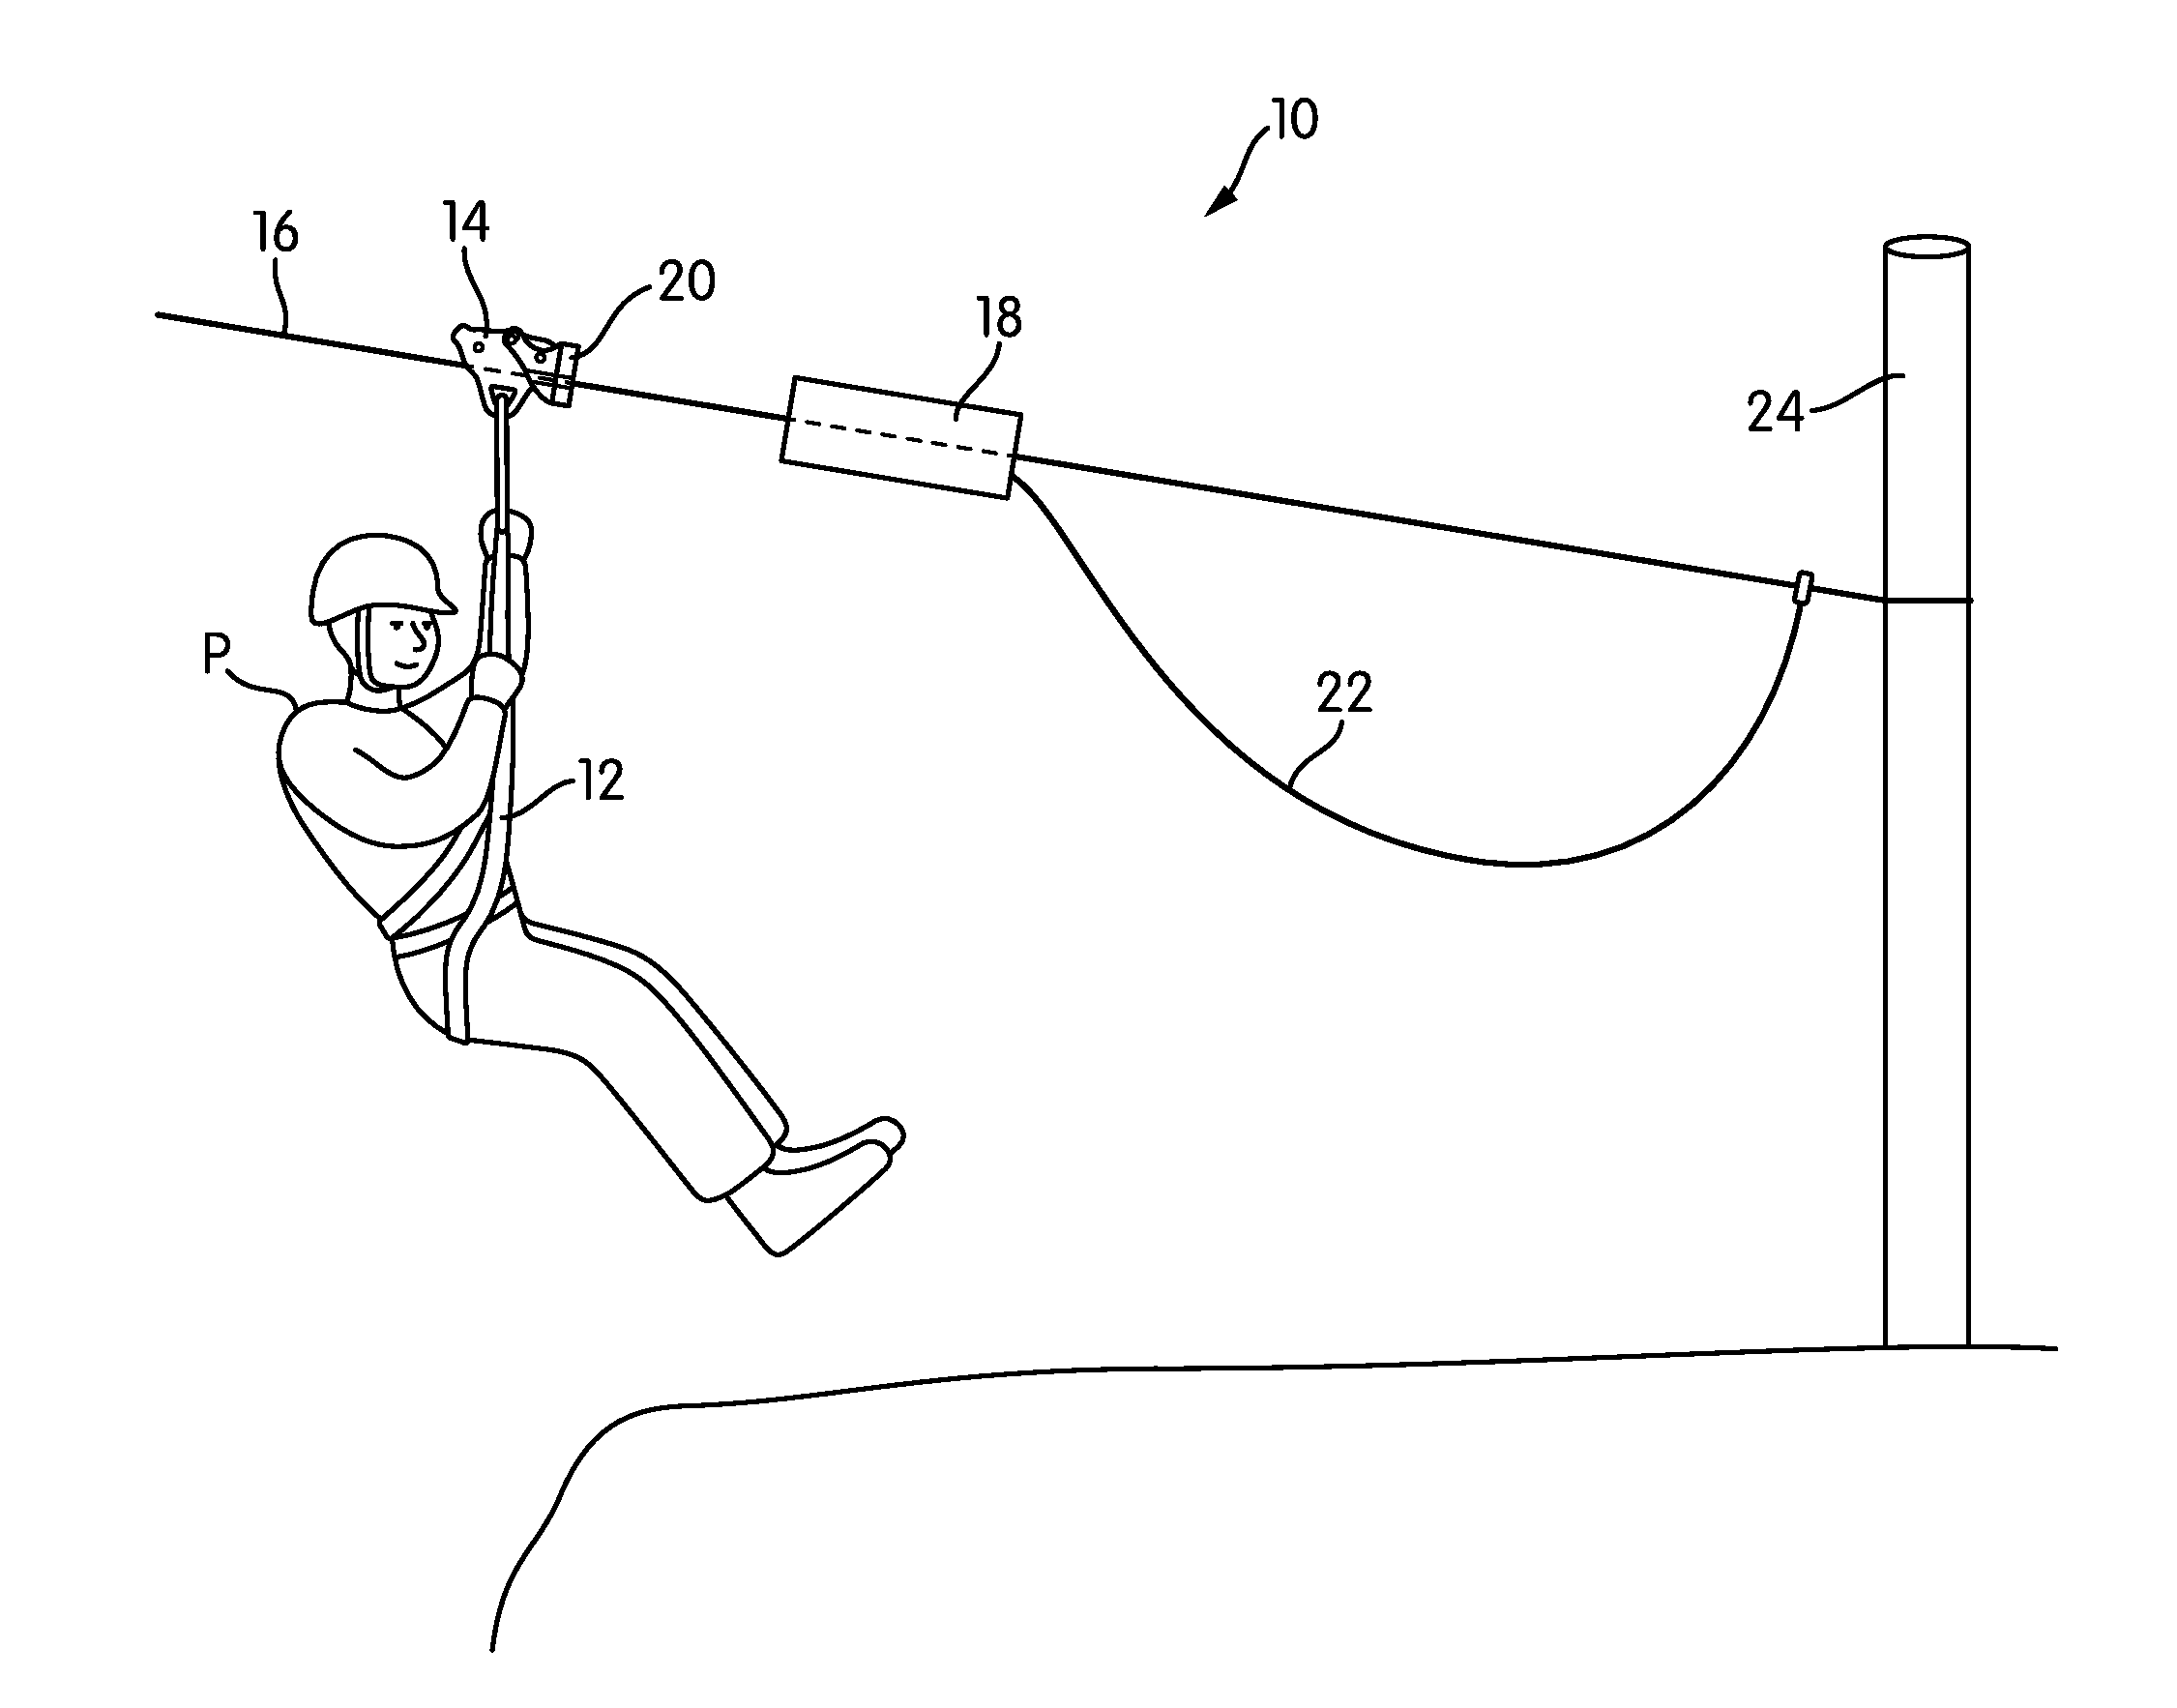 Brake and capture system for zip lining